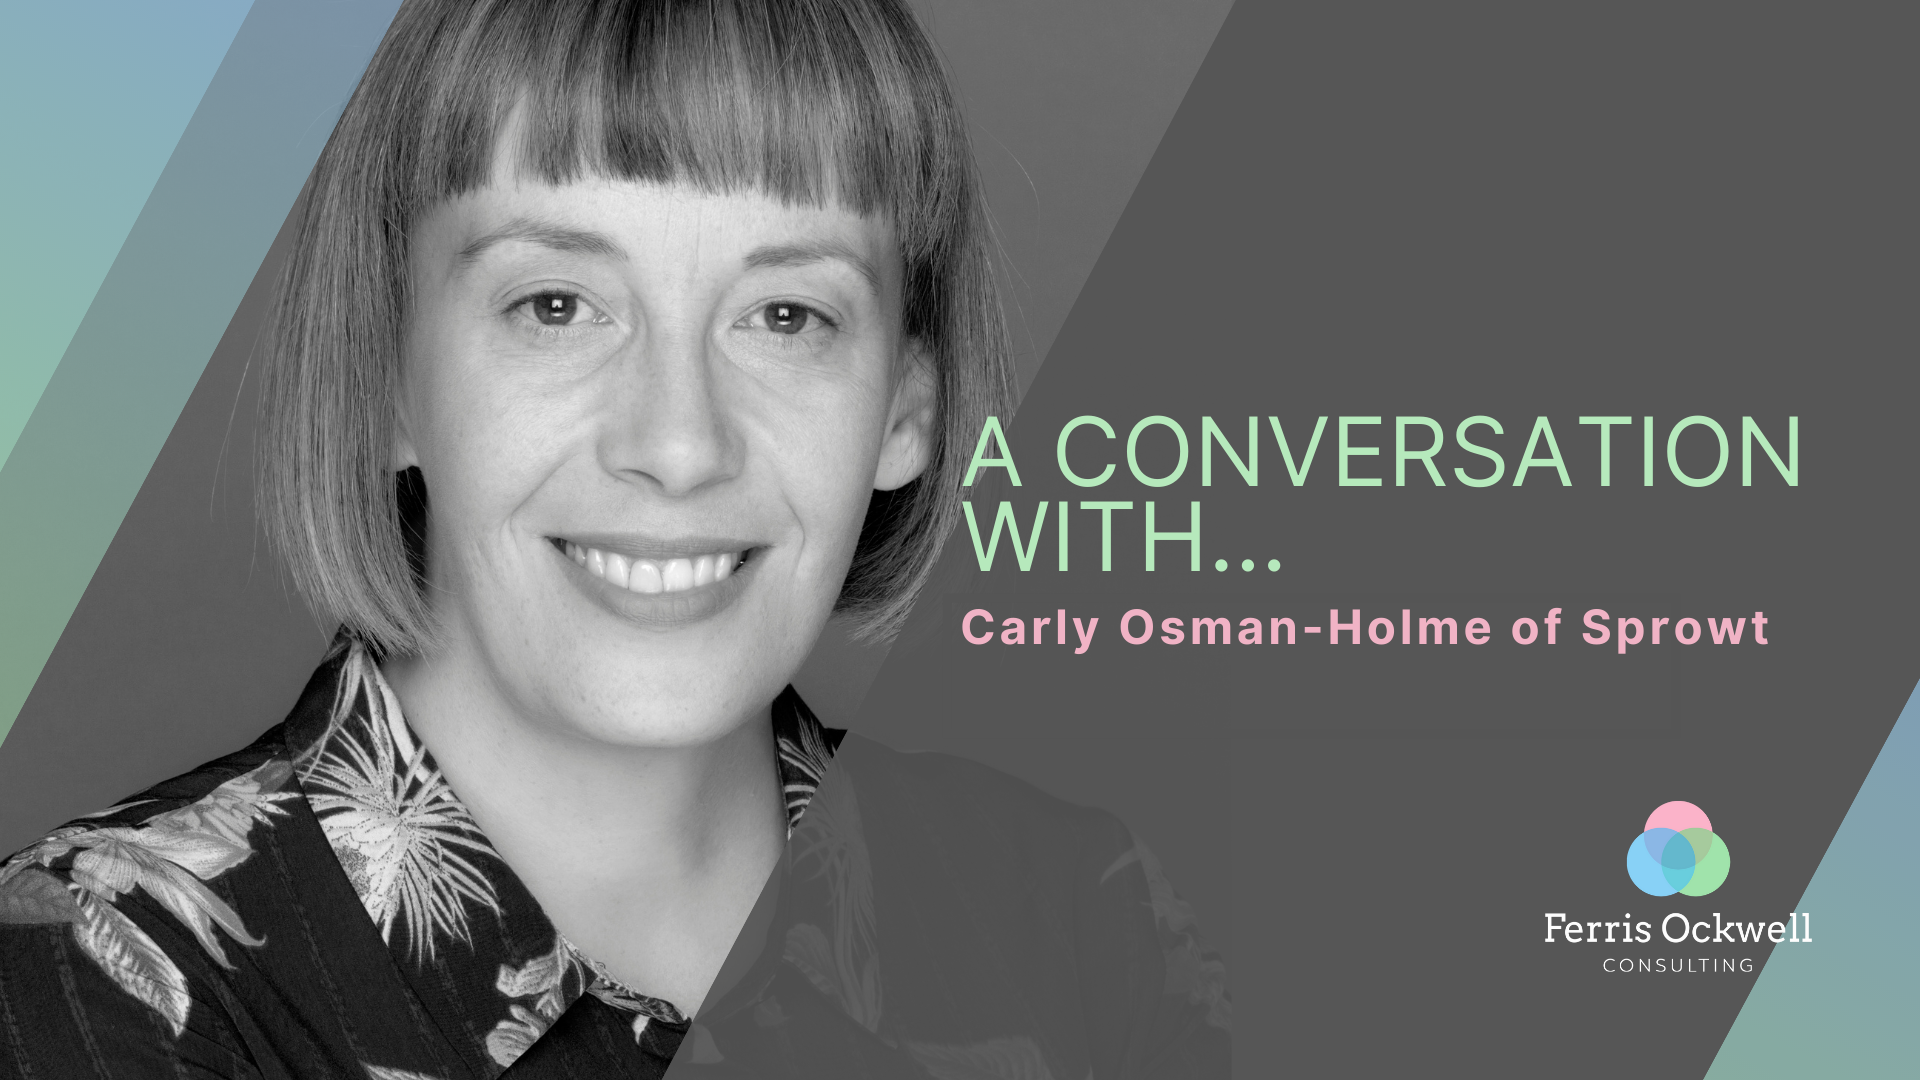 Impact Leadership: A Conversation with Carly Osman-Holme of Sprowt - Ferris Ockwell Consulting